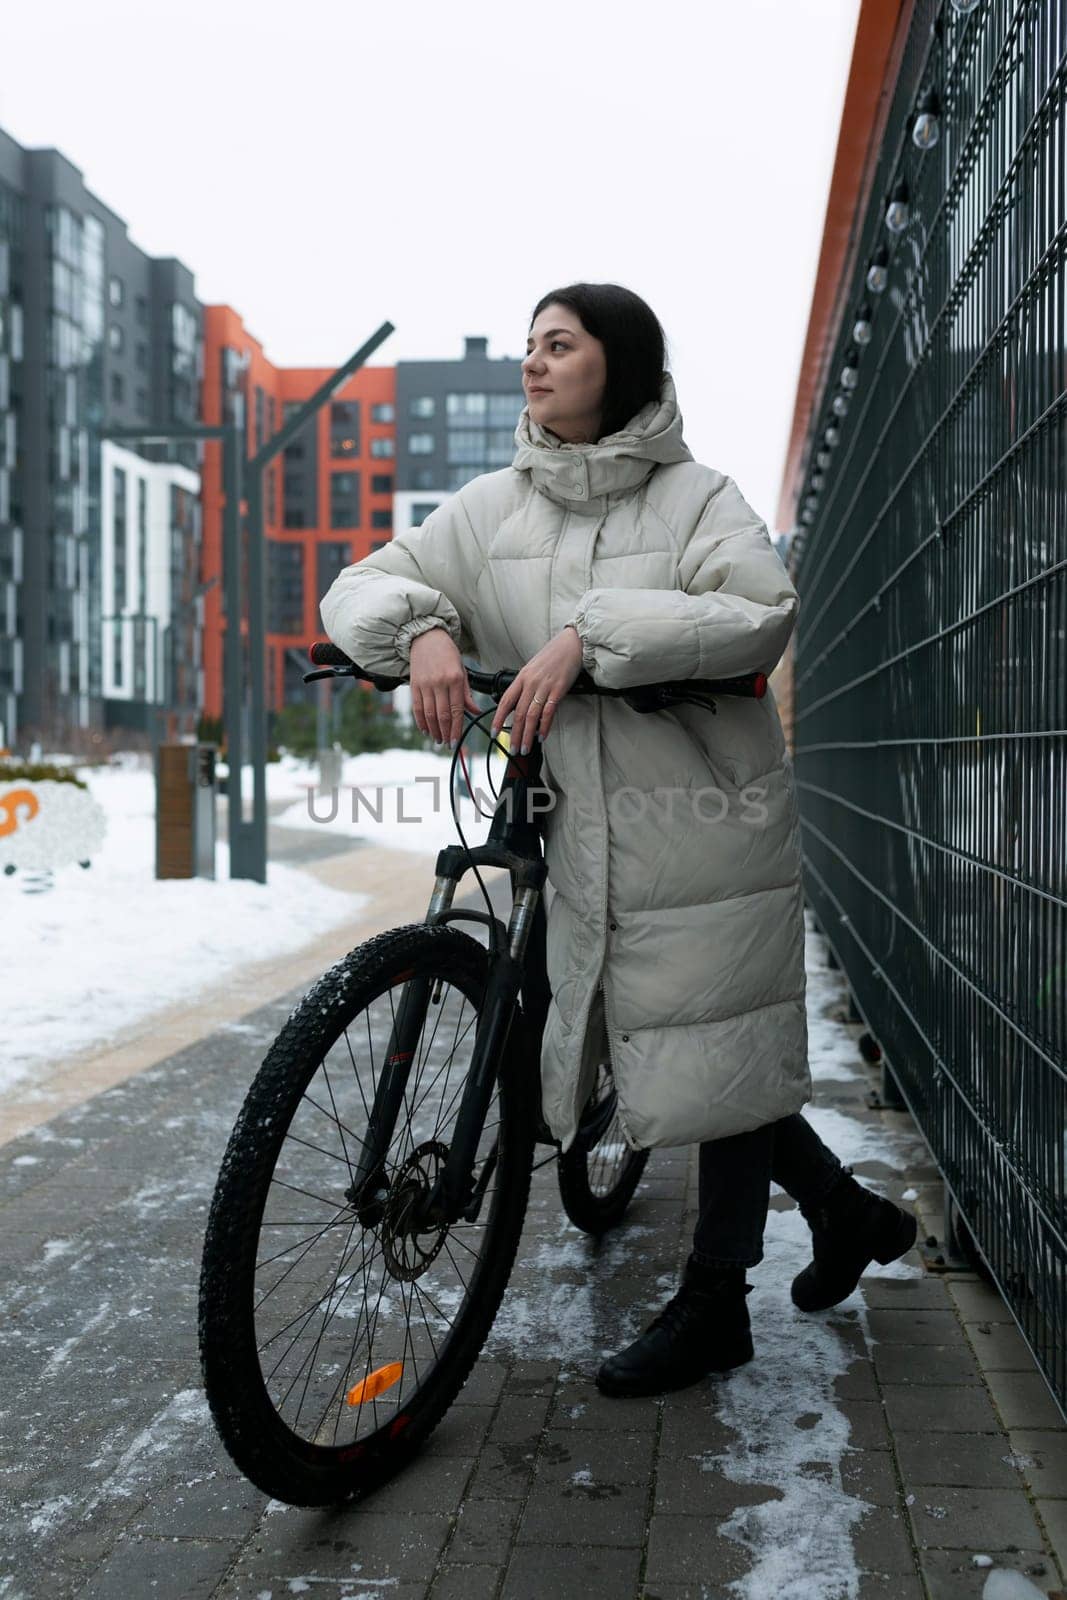 Woman With Bike in Snow by TRMK